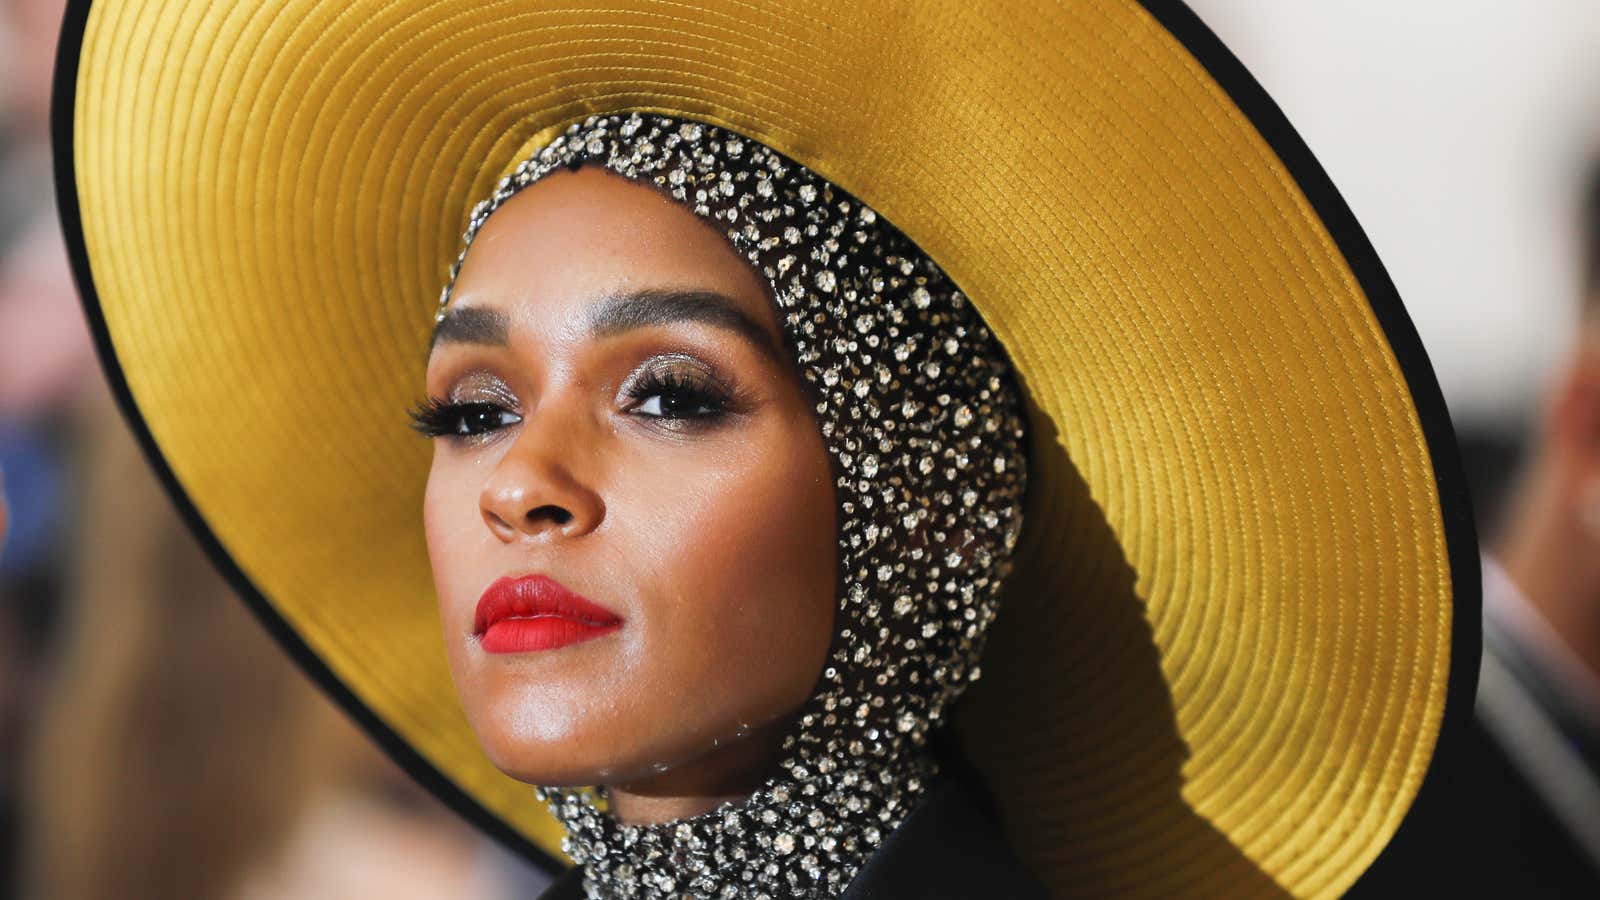 Janelle Monae is leading the pansexual movement in 2018.